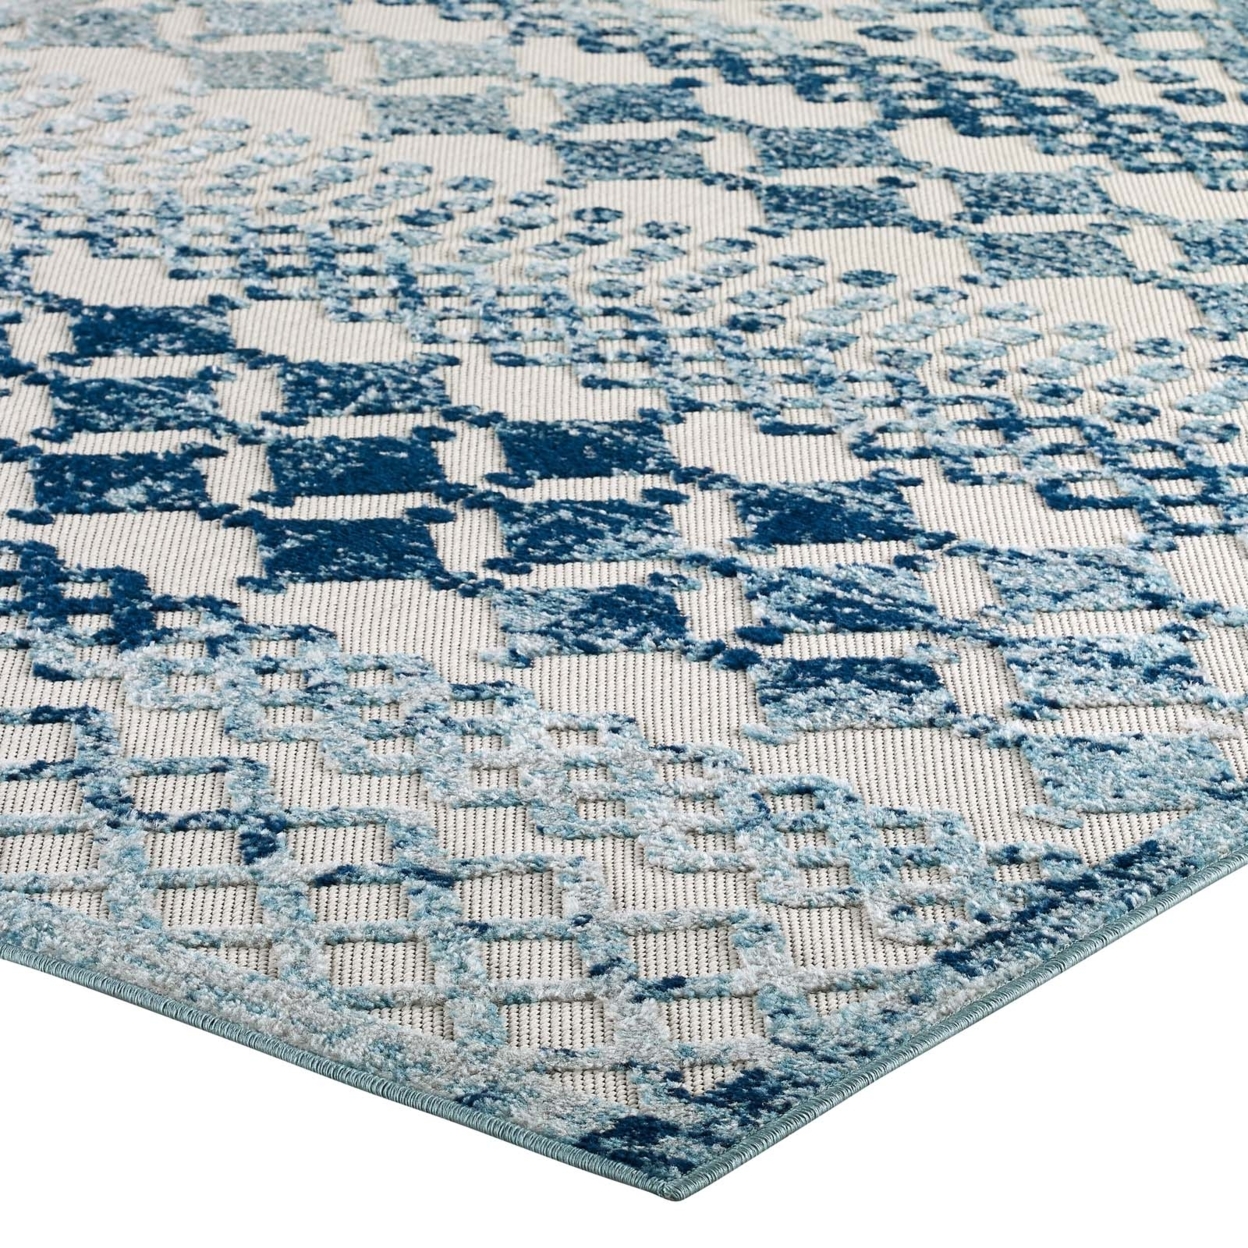 Reflect Giada Abstract Diamond Moroccan Trellis 5x8 Indoor Or Outdoor Area Rug, Ivory And Blue